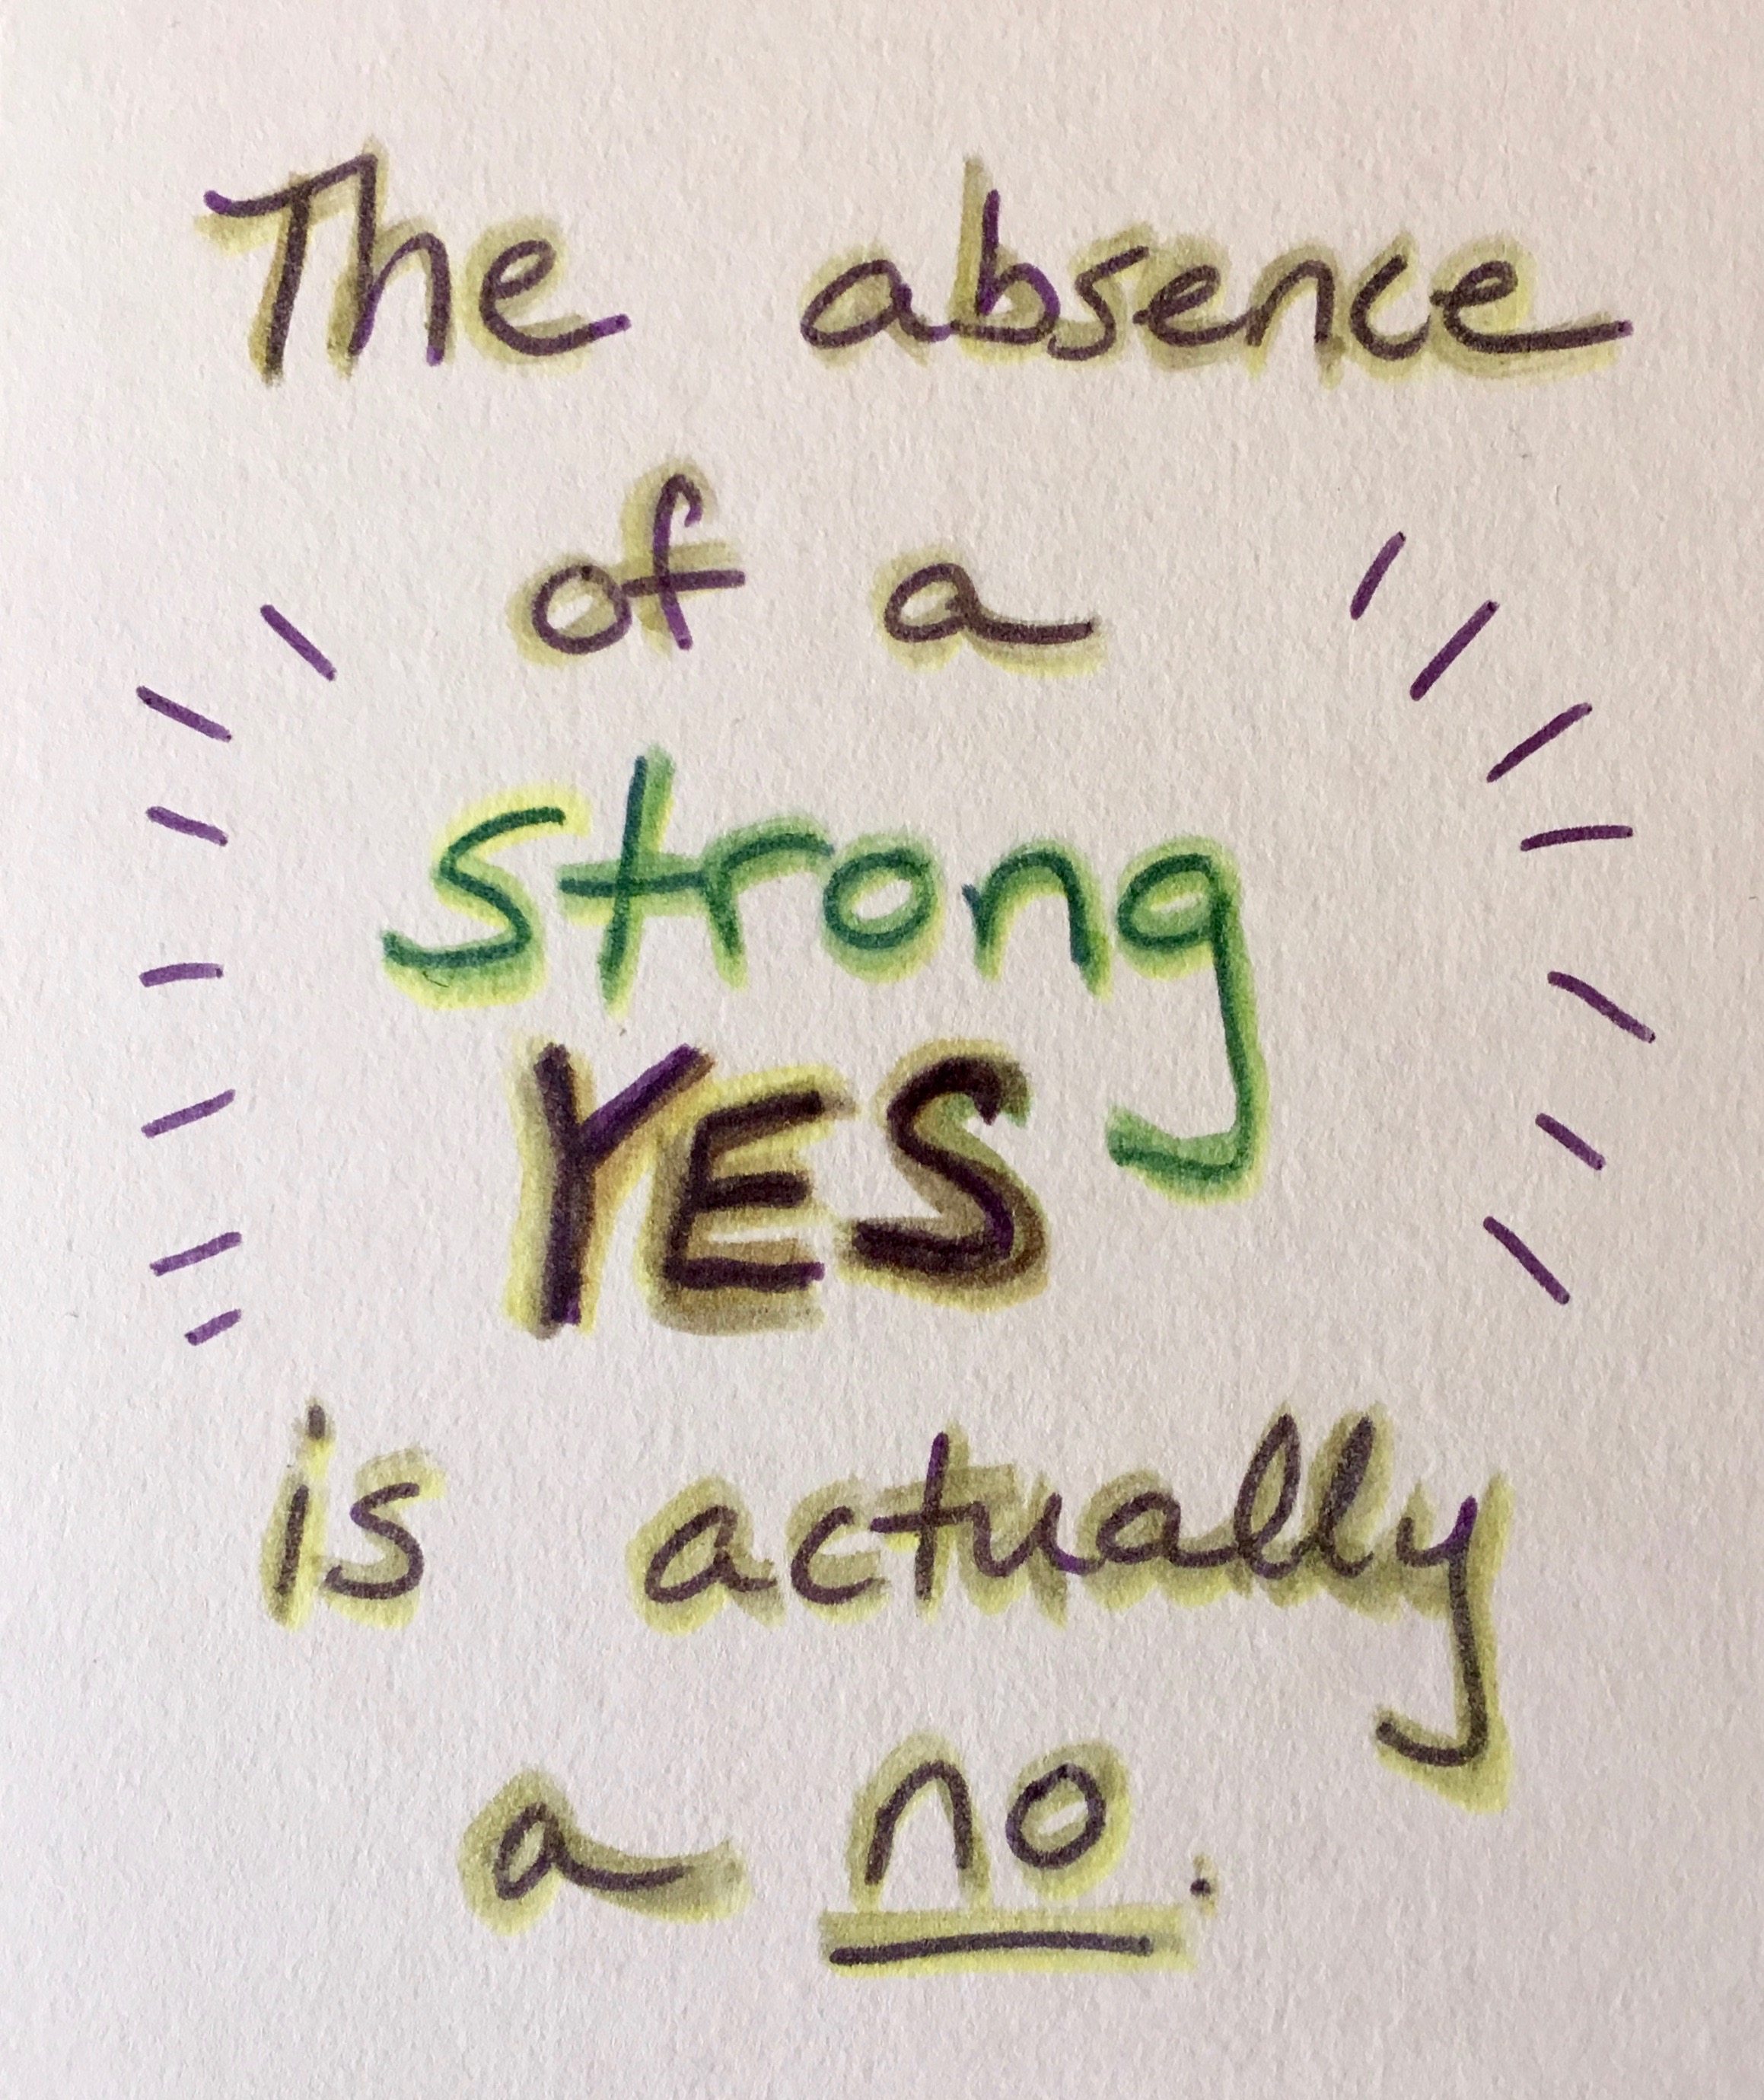 Hand-drawn card (white background with green, yellow, and purple marker) that shares the mantra: “The absence of a strong YES is actually a no.”